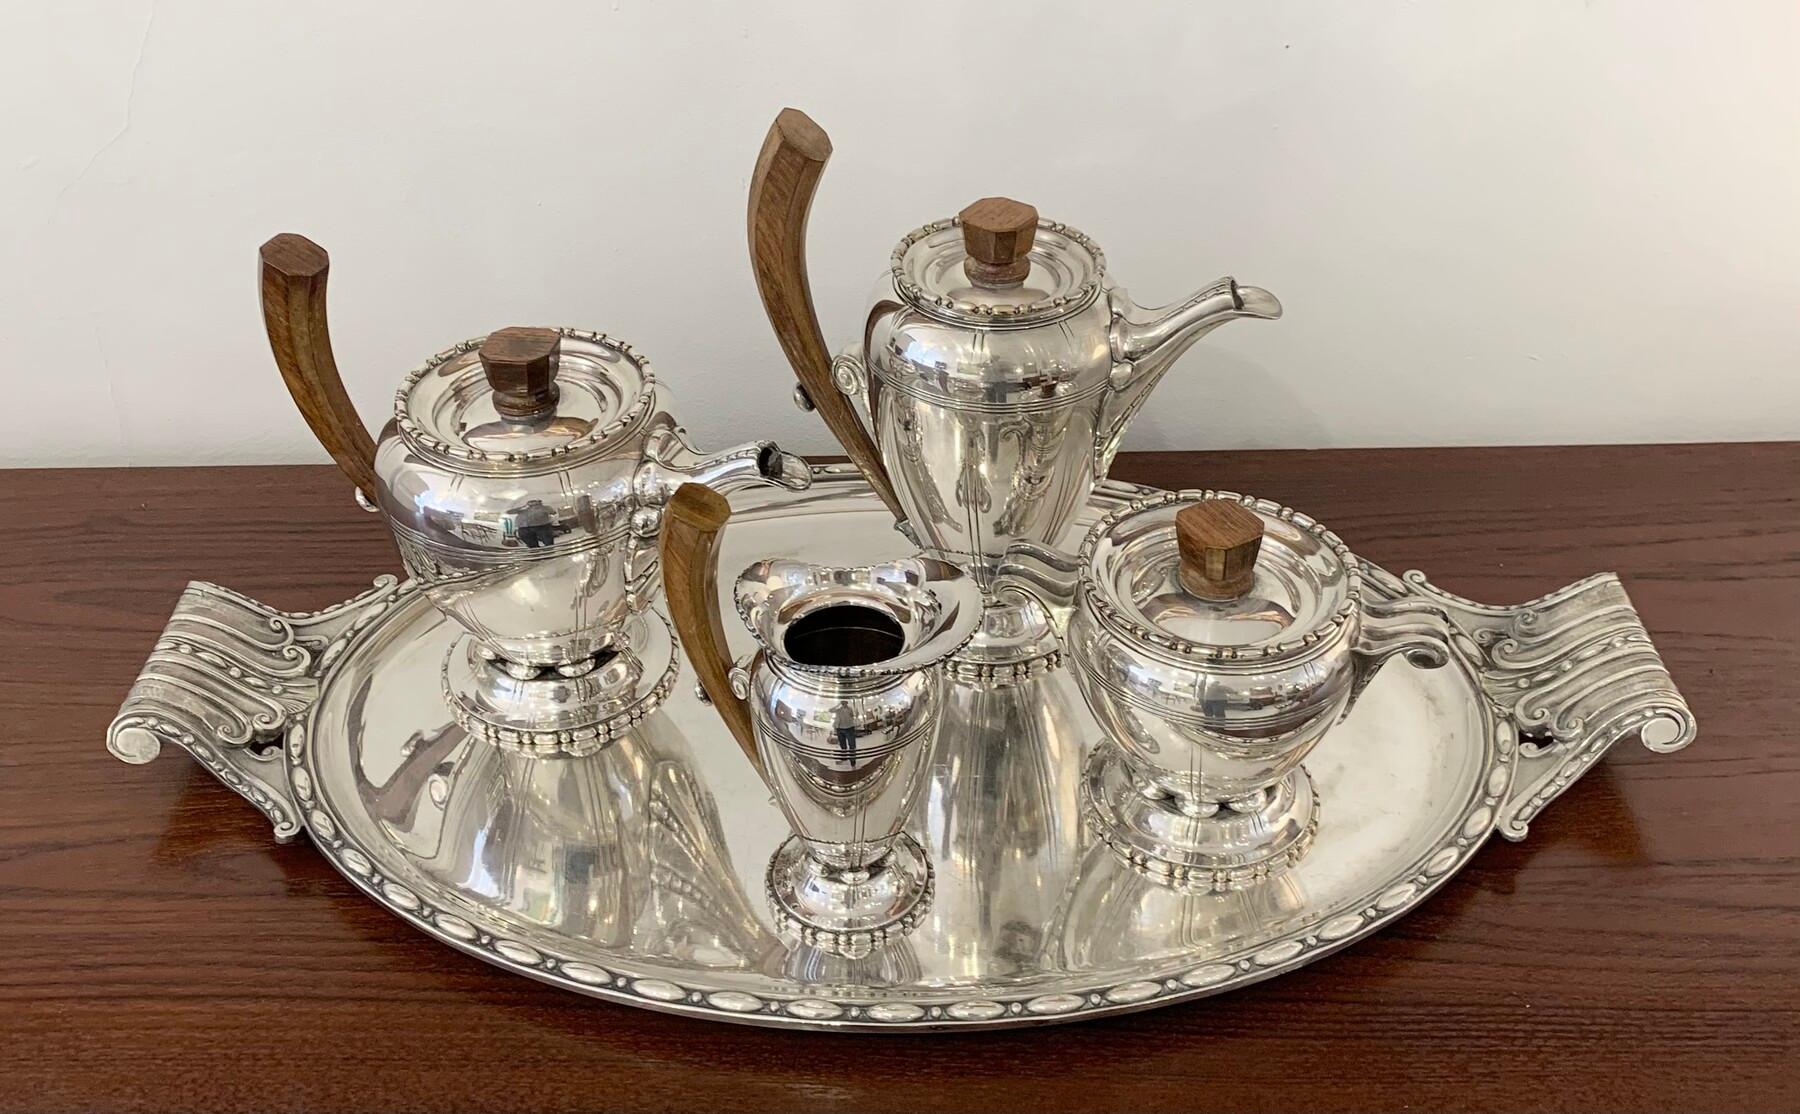 Durousseau & Raynaud Hallmarked Art Deco Silver Plated Service Set, France In Good Condition For Sale In Brussels, BE